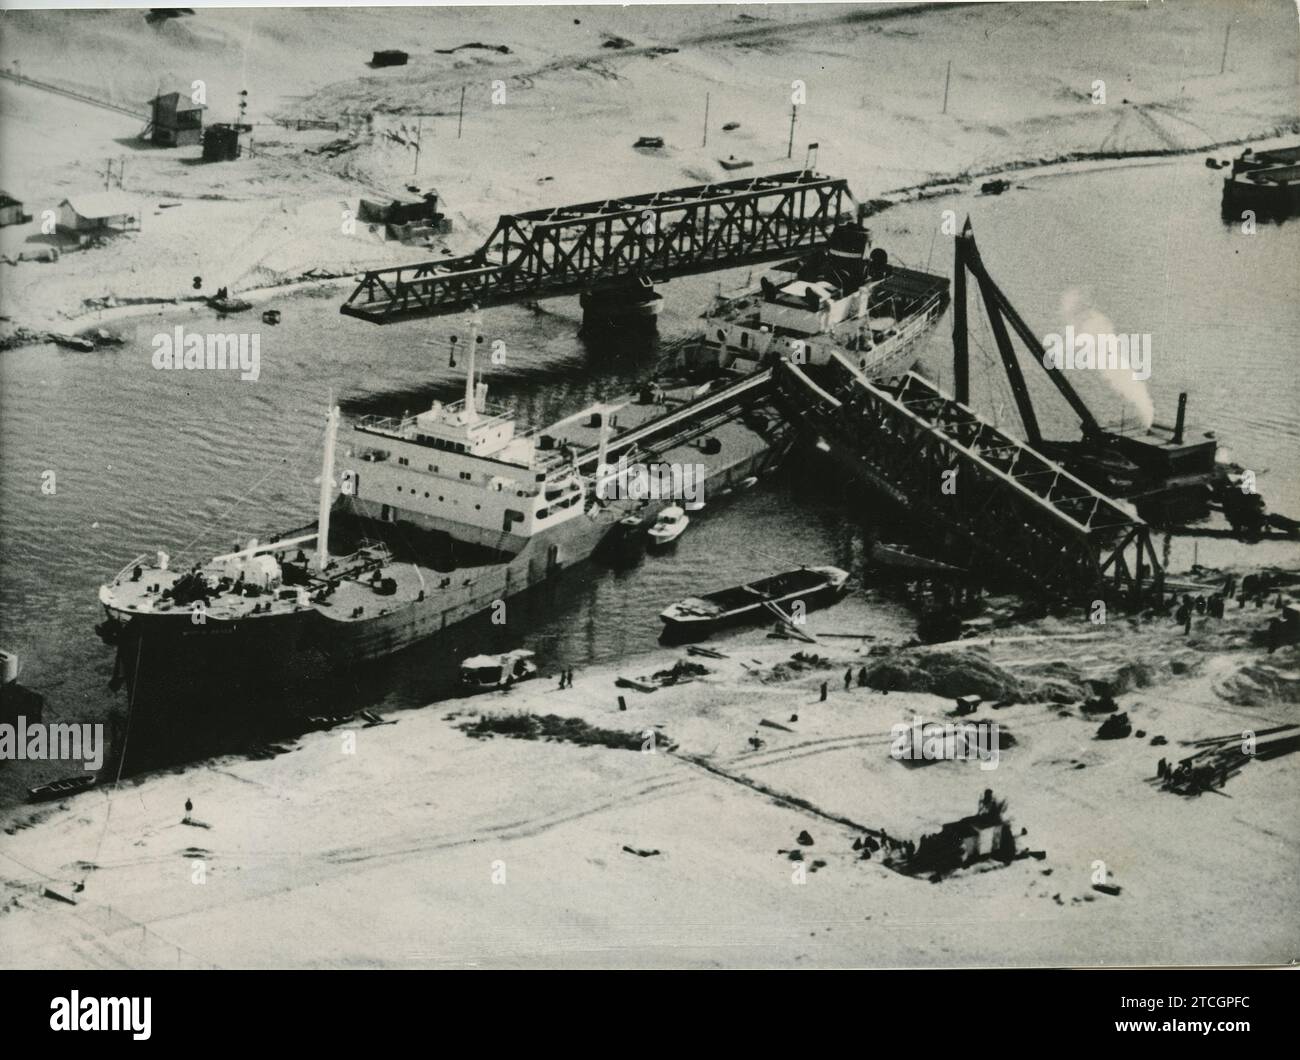 Suez Canal, Egypt, 1955. Ships from around the world stranded in the canal due to an accident when a Liberian ship crashed into a bridge nine miles north of Somalia. Credit: Album / Archivo ABC Stock Photo